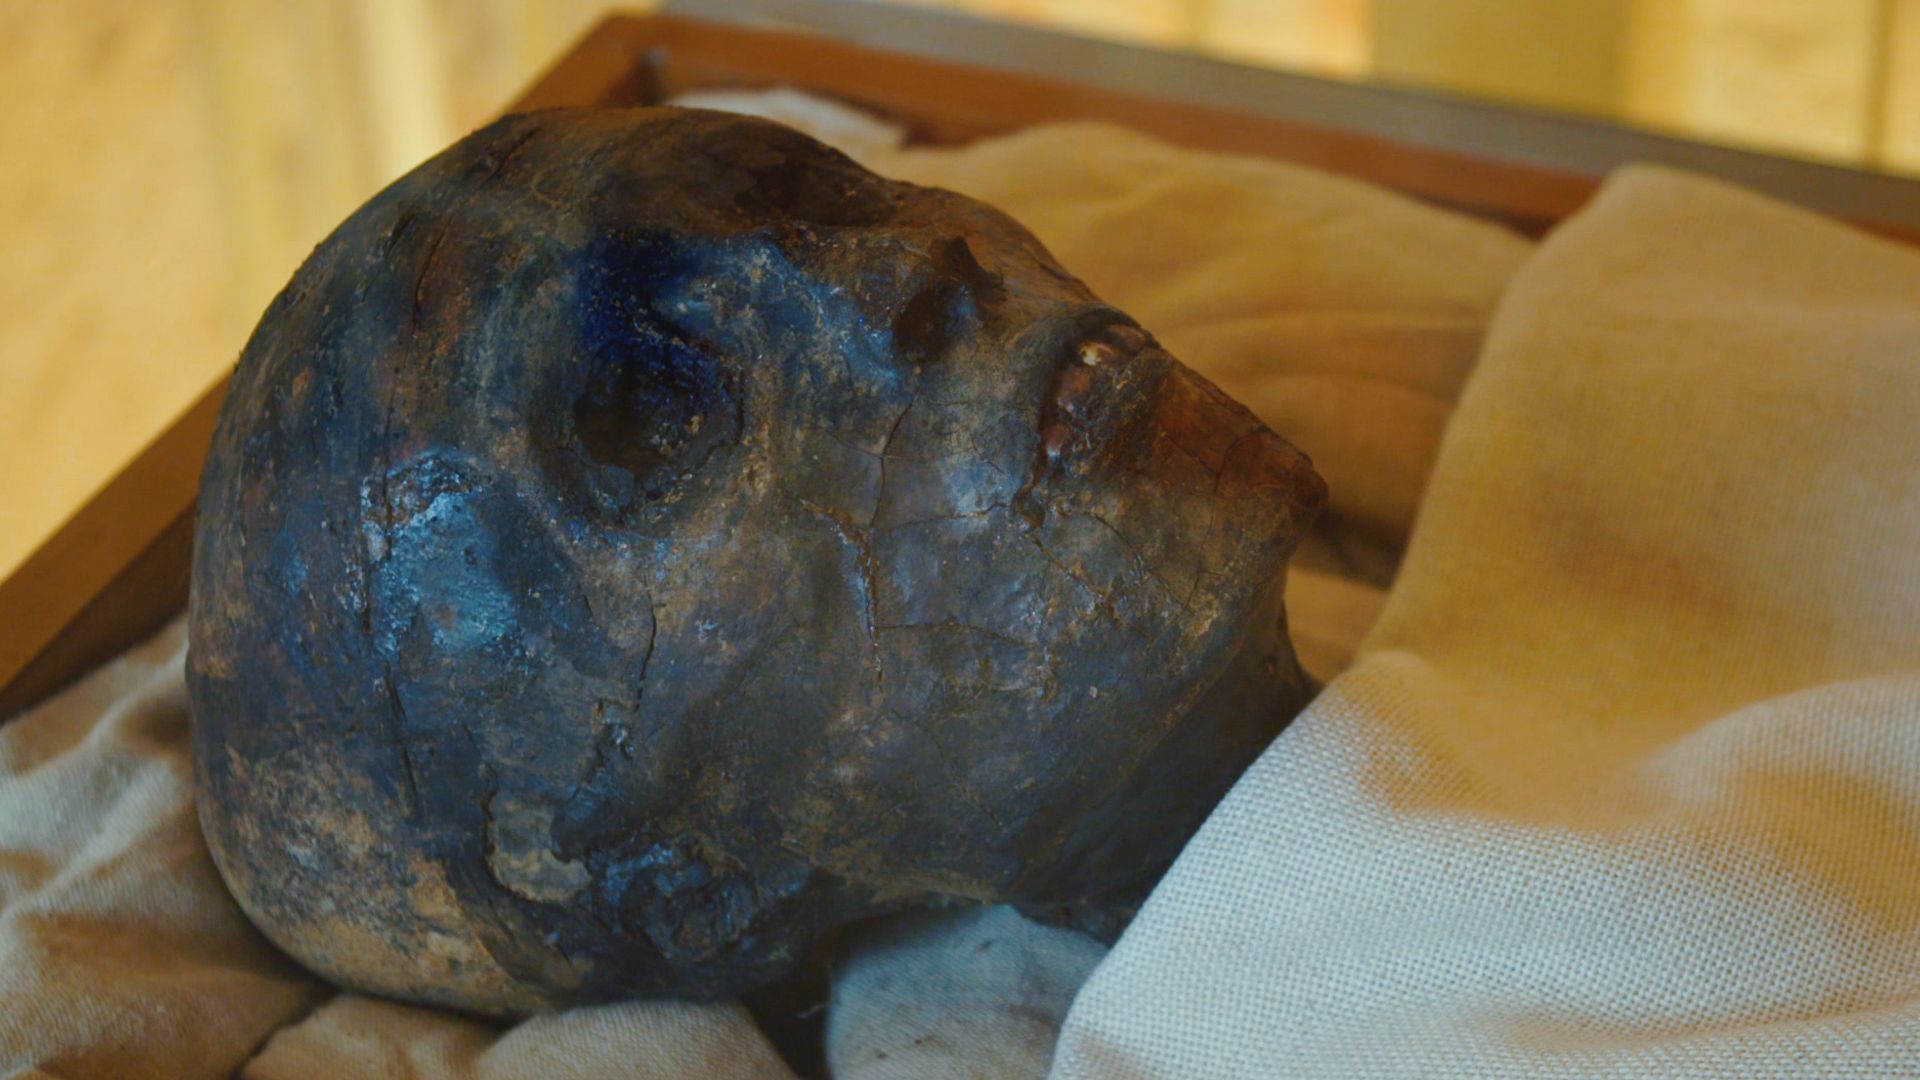 Close up of mummy. This is from Lost Treasures of Egypt, season 3. [Photo of the day - September 2021]